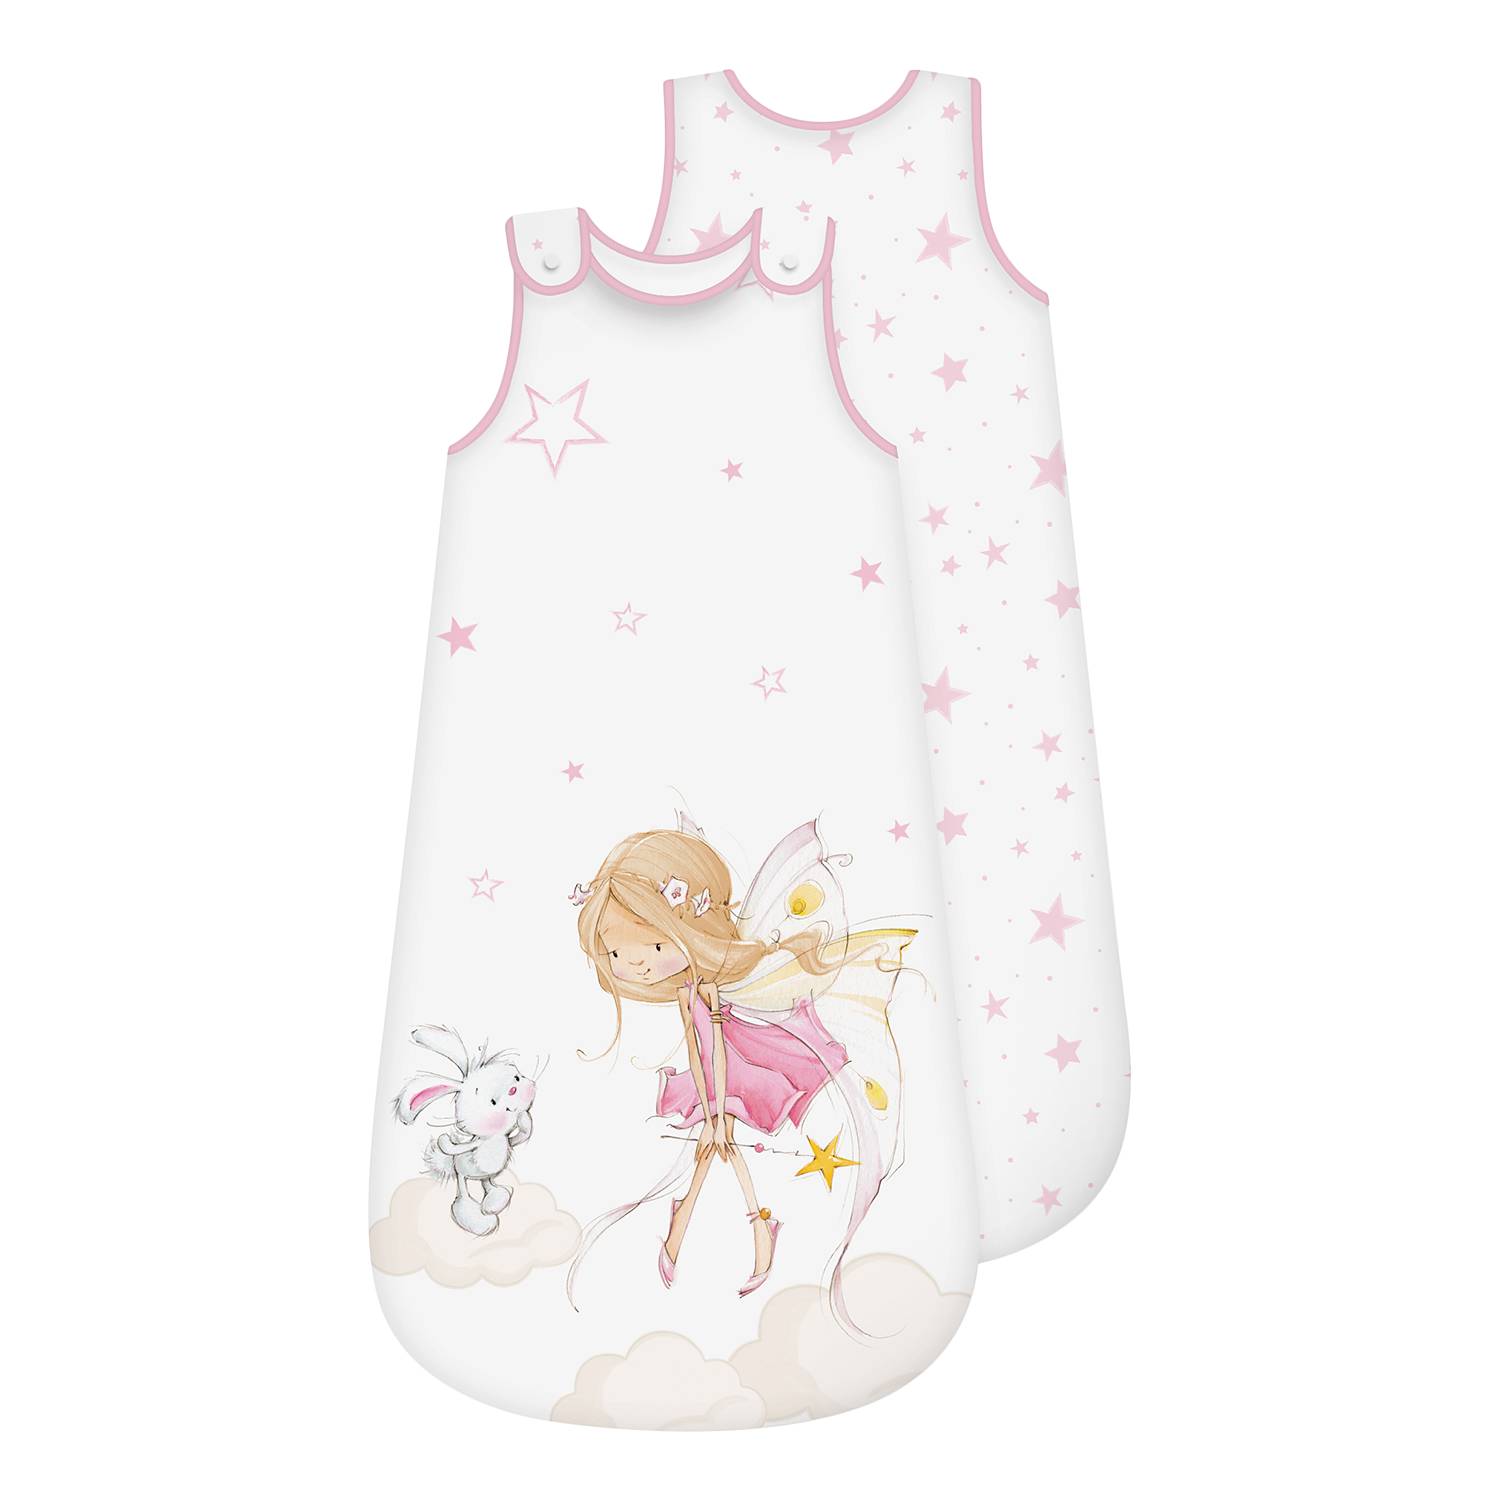 Image of Gigoteuse Jersey Little Fairy 000000001000244992